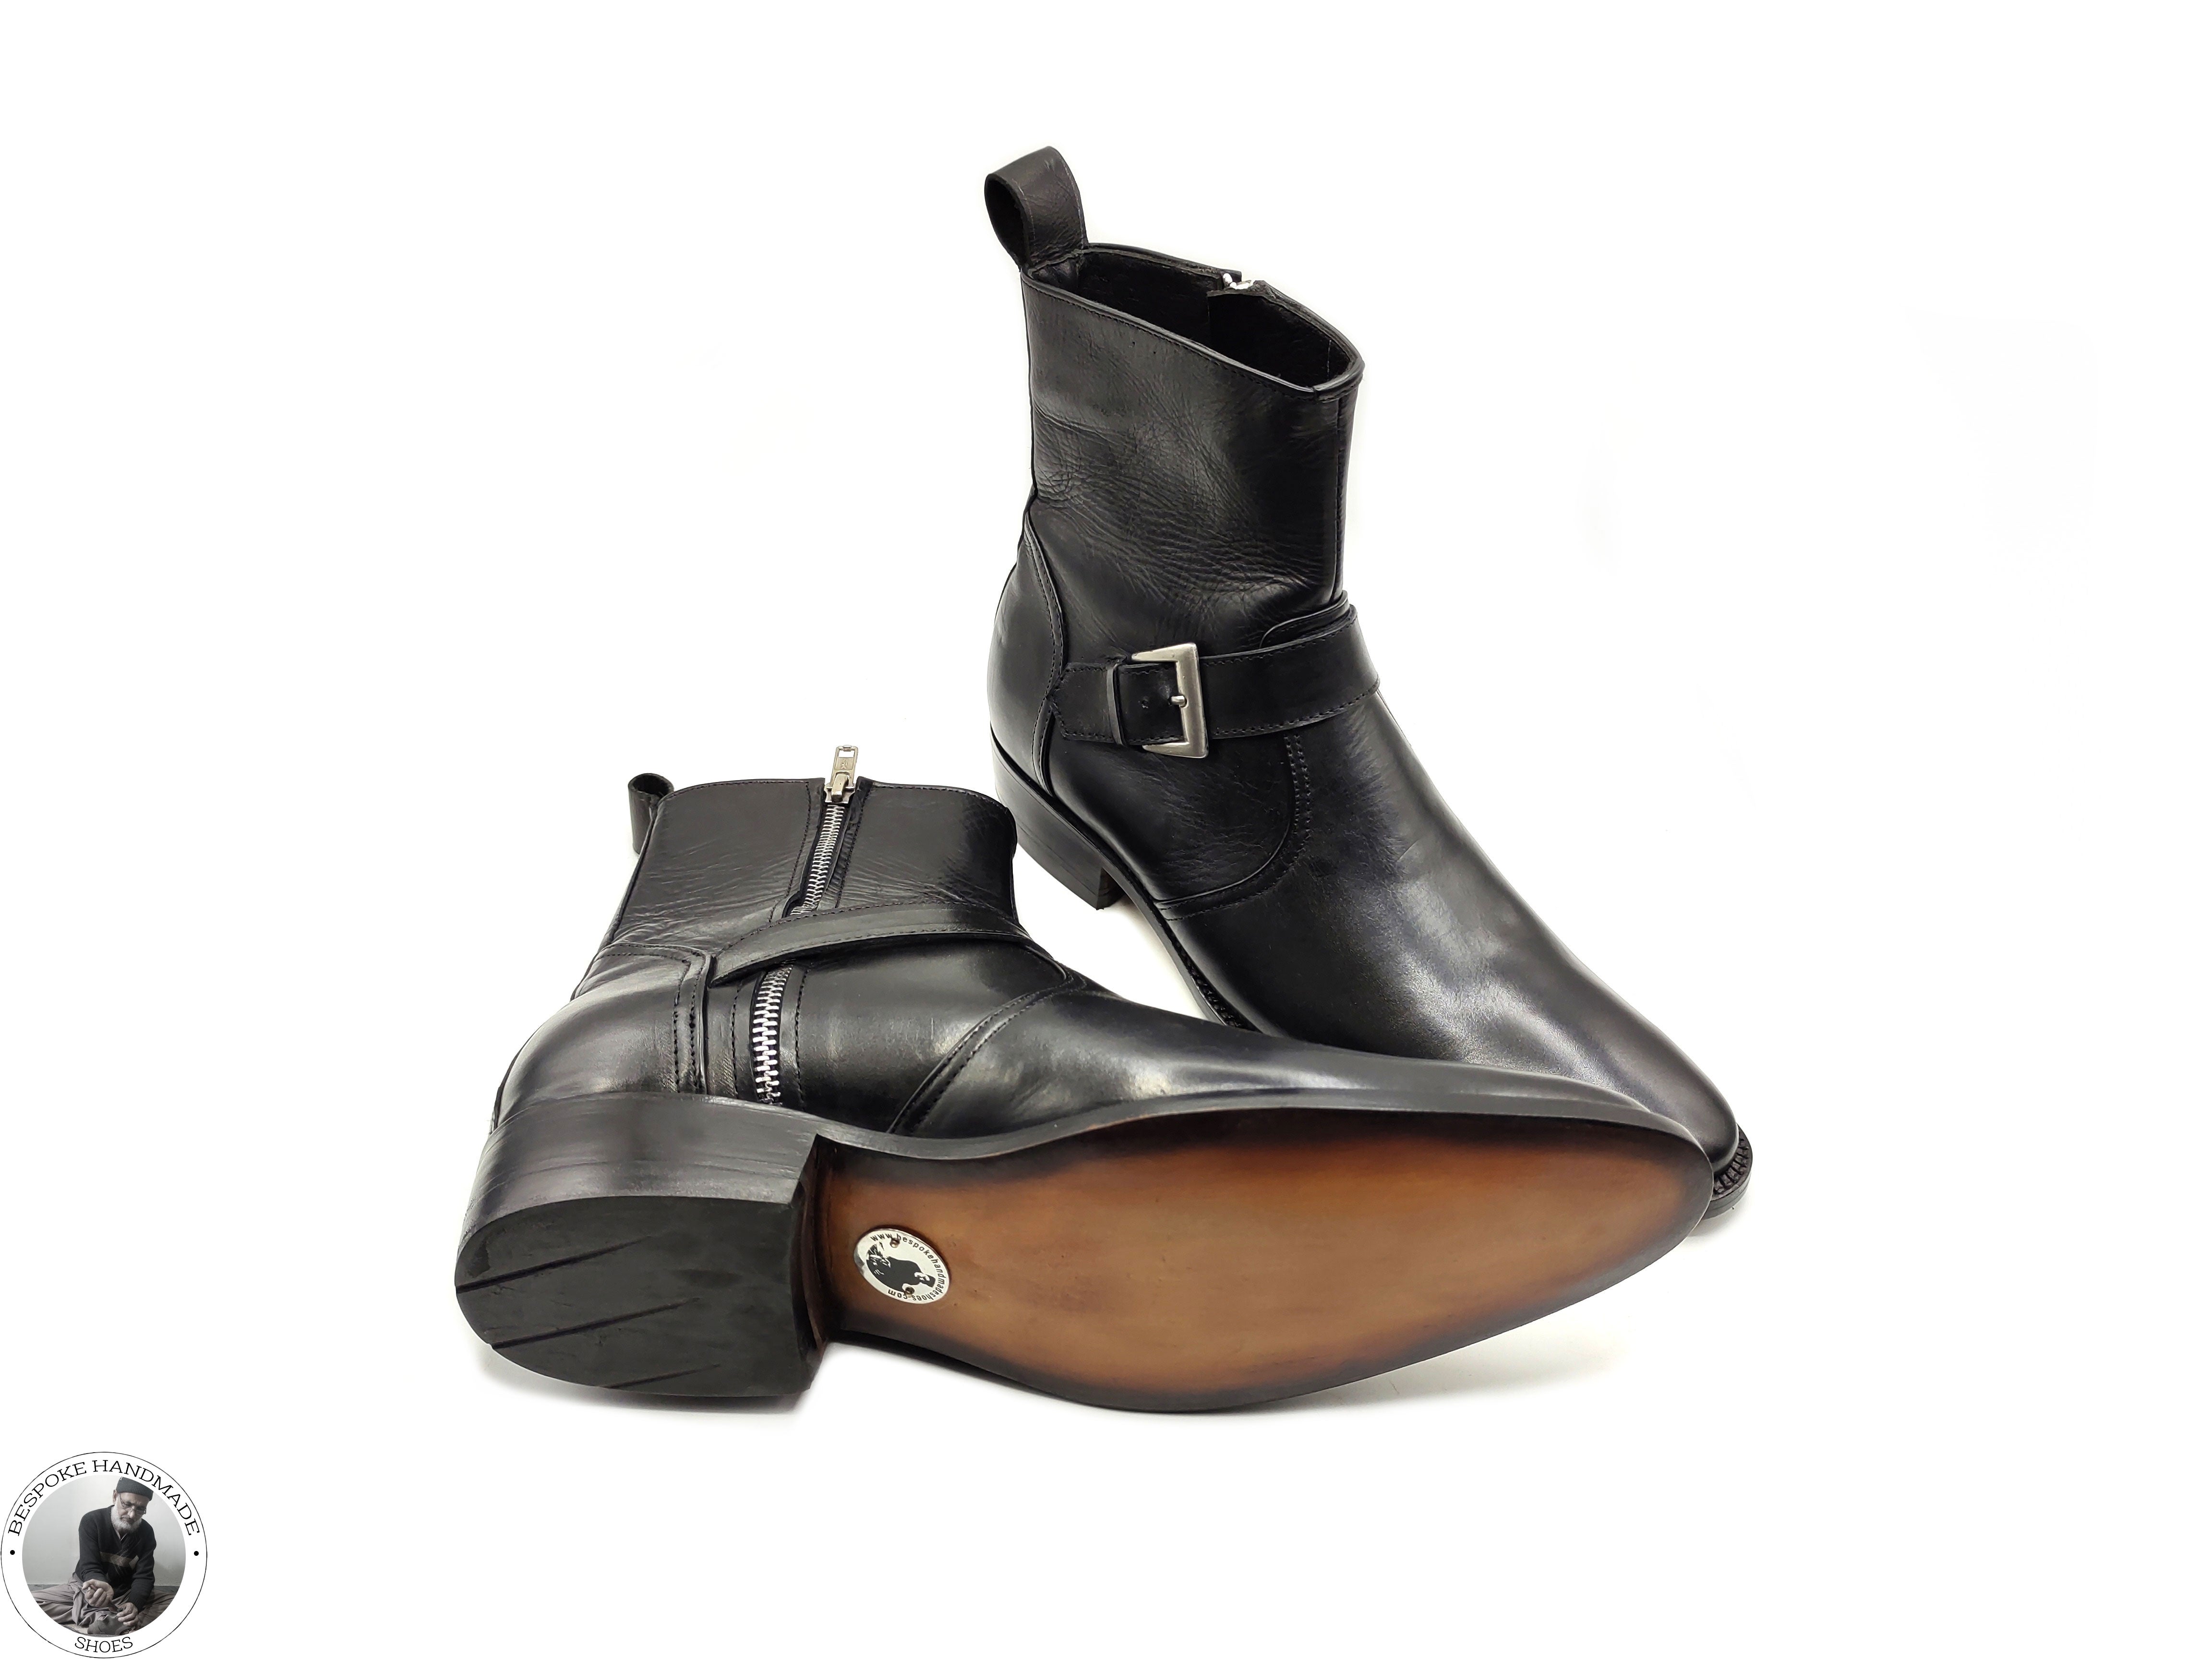 High Ankle Whole Cut Single Monk Strap Boot